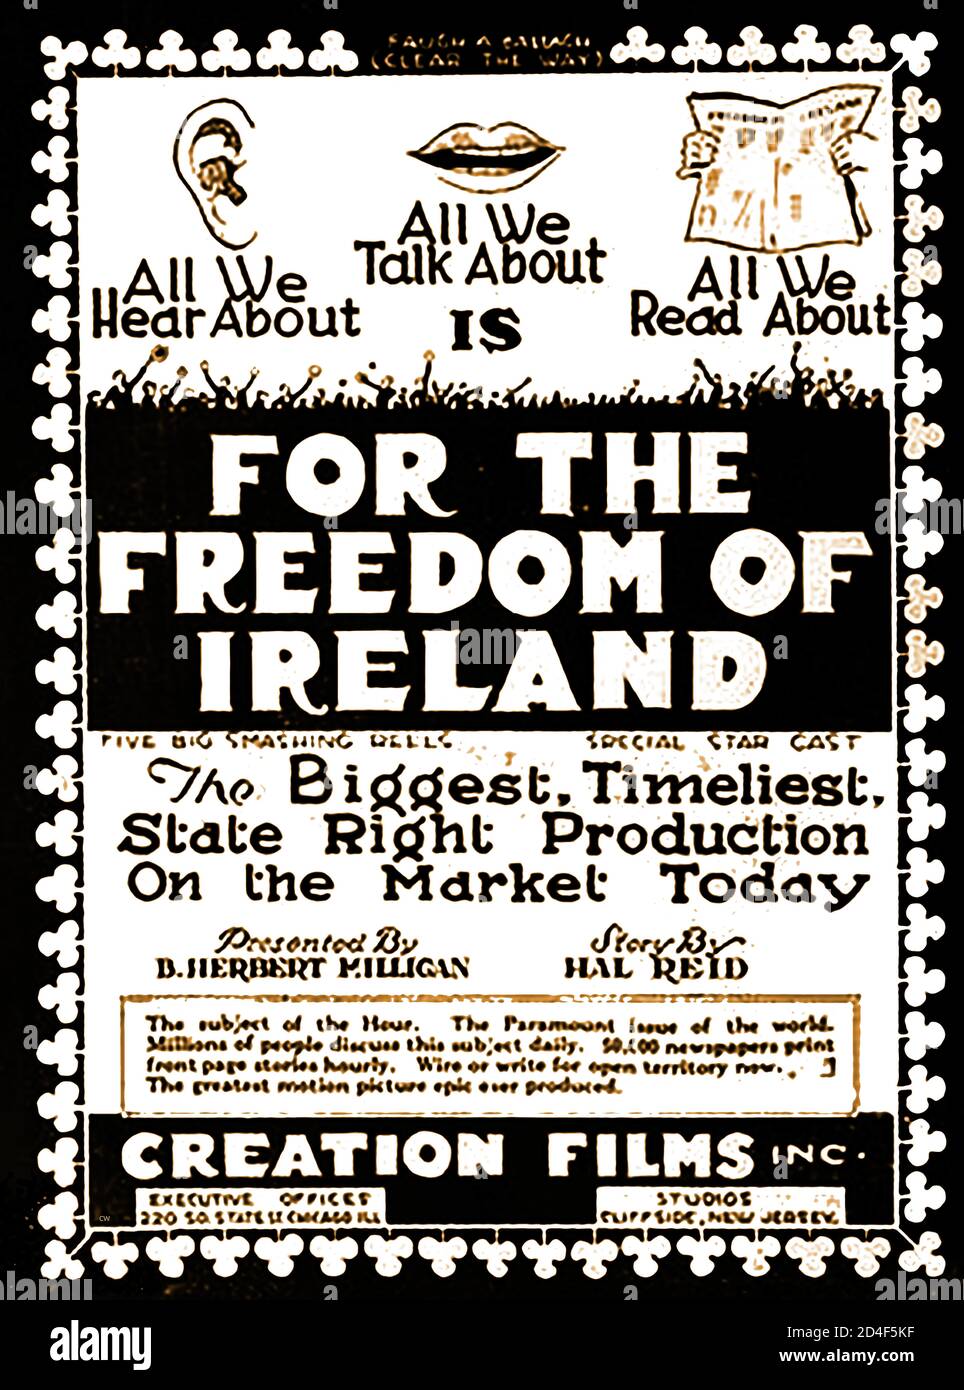 1929 film poster for 'For The Feedom of Ireland' stated to be the Biggest, Timeliest, State Right Production on the Market Today' boasting it was the 'Greatest motion picture epic ever produced'- Presented by  B Herbert Milligan, written by Hal Reid and starring Vincent Coleman, Larry Fisher & Robert Clugston. It was produced by Creation Films  of Chicago (Studios Cliffside New Jersey) , USA. The propaganda film favored the Irish  liberationists, and it was set a few years before 1920, when one of the Sein Feine leaders, American-born Eamon deValera, was imprisoned, Stock Photo